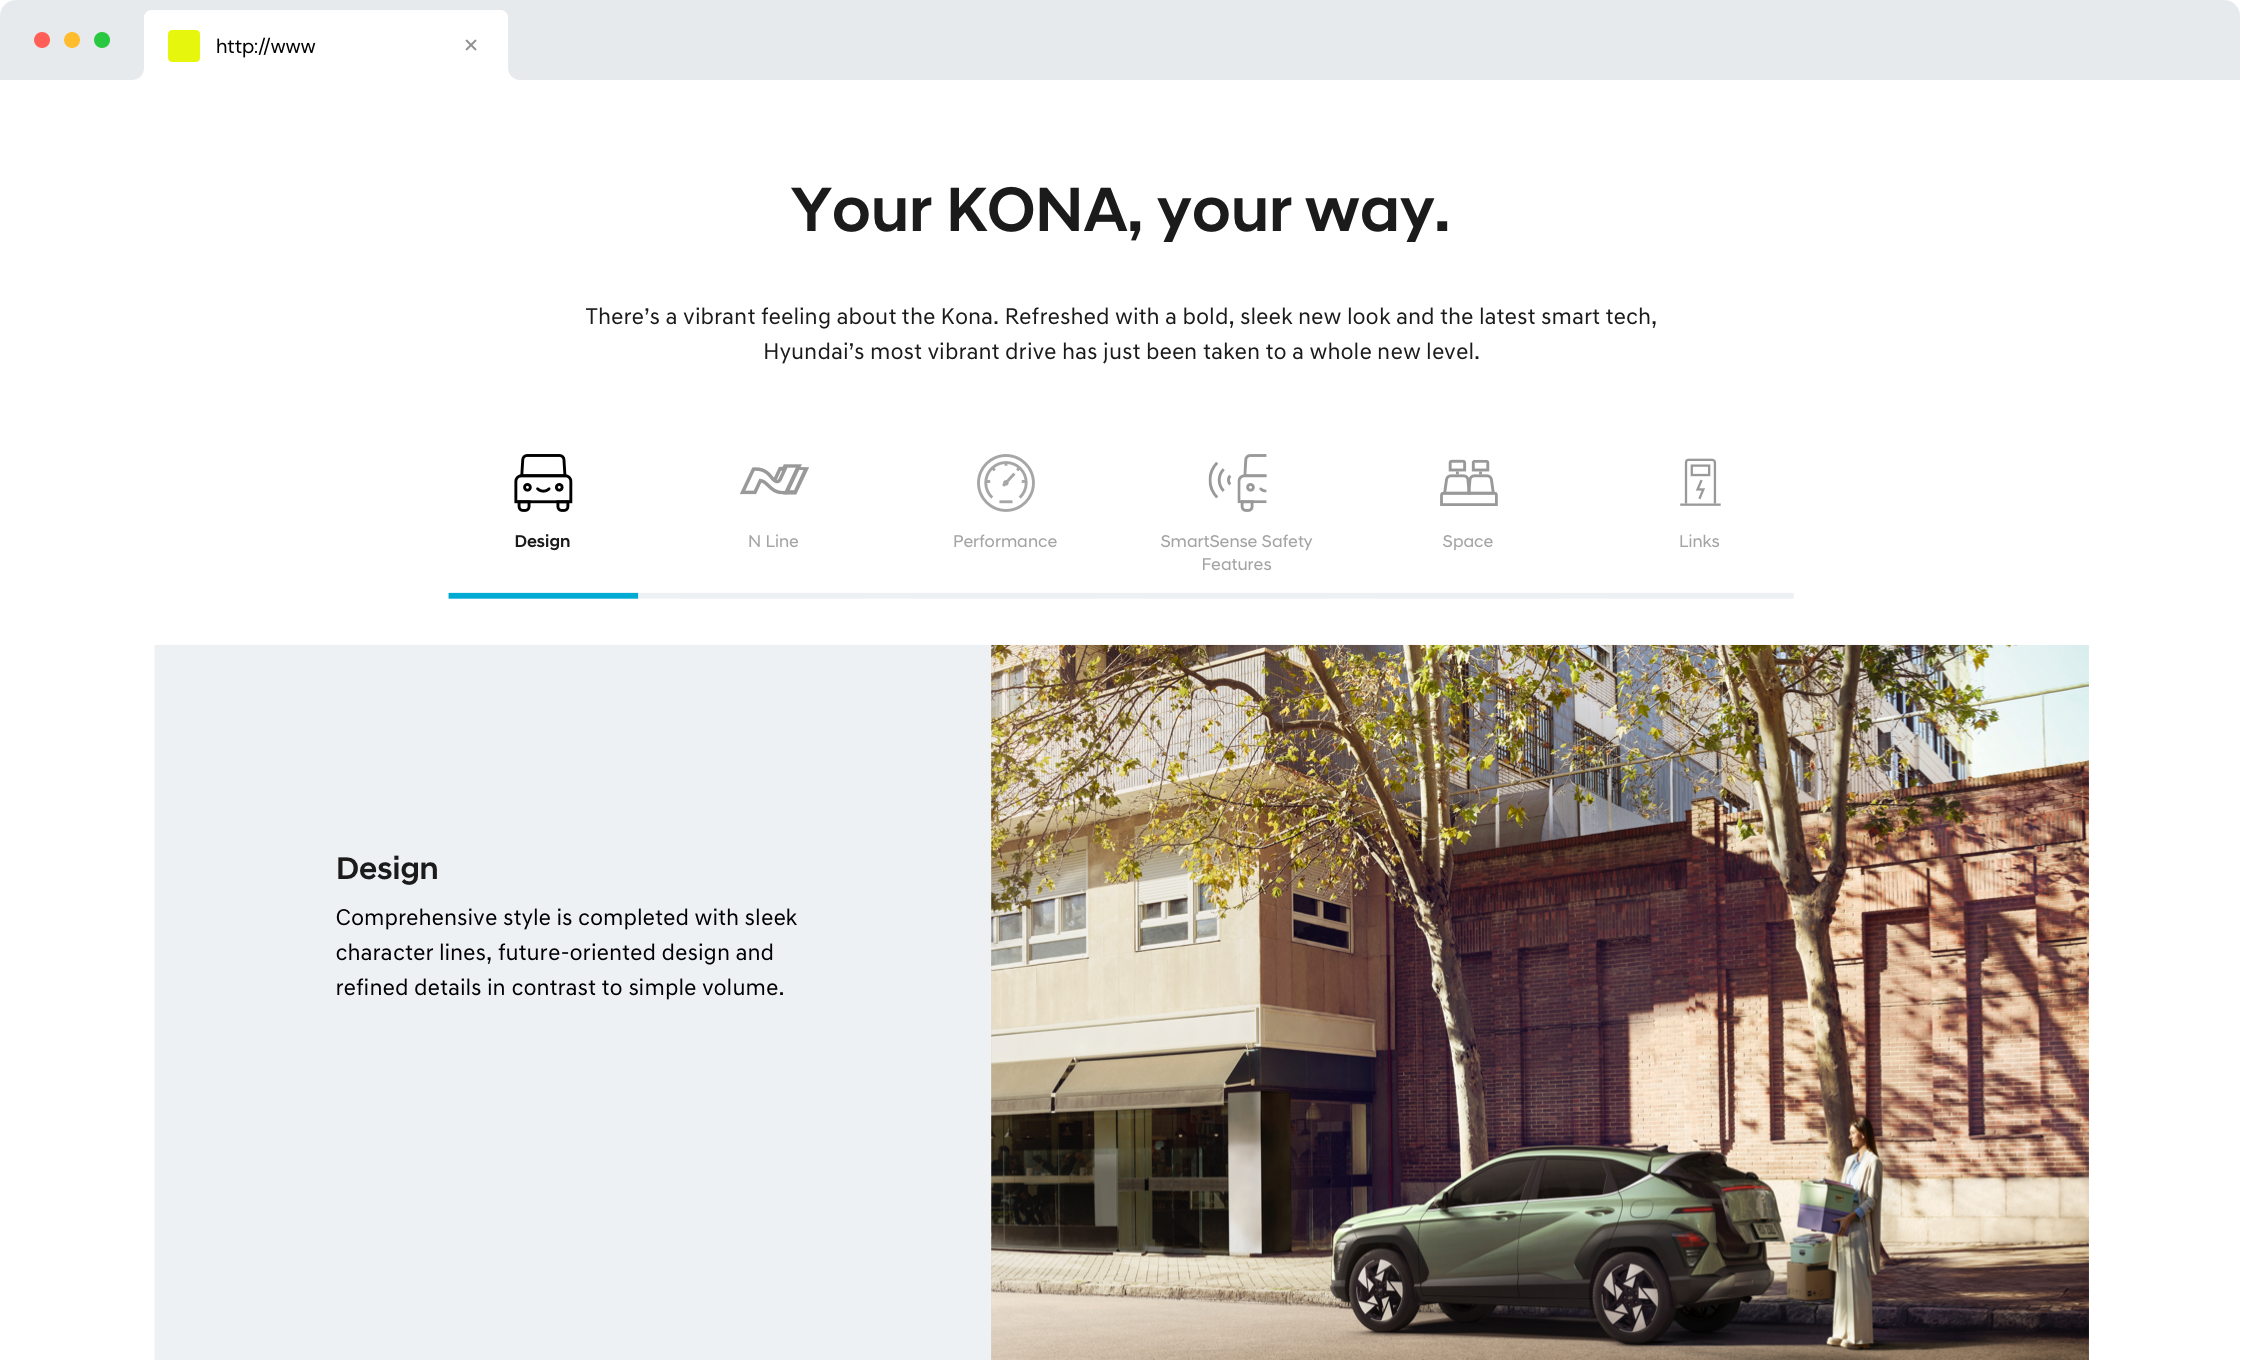 Web page design for Hyundai KONA with design and safety features